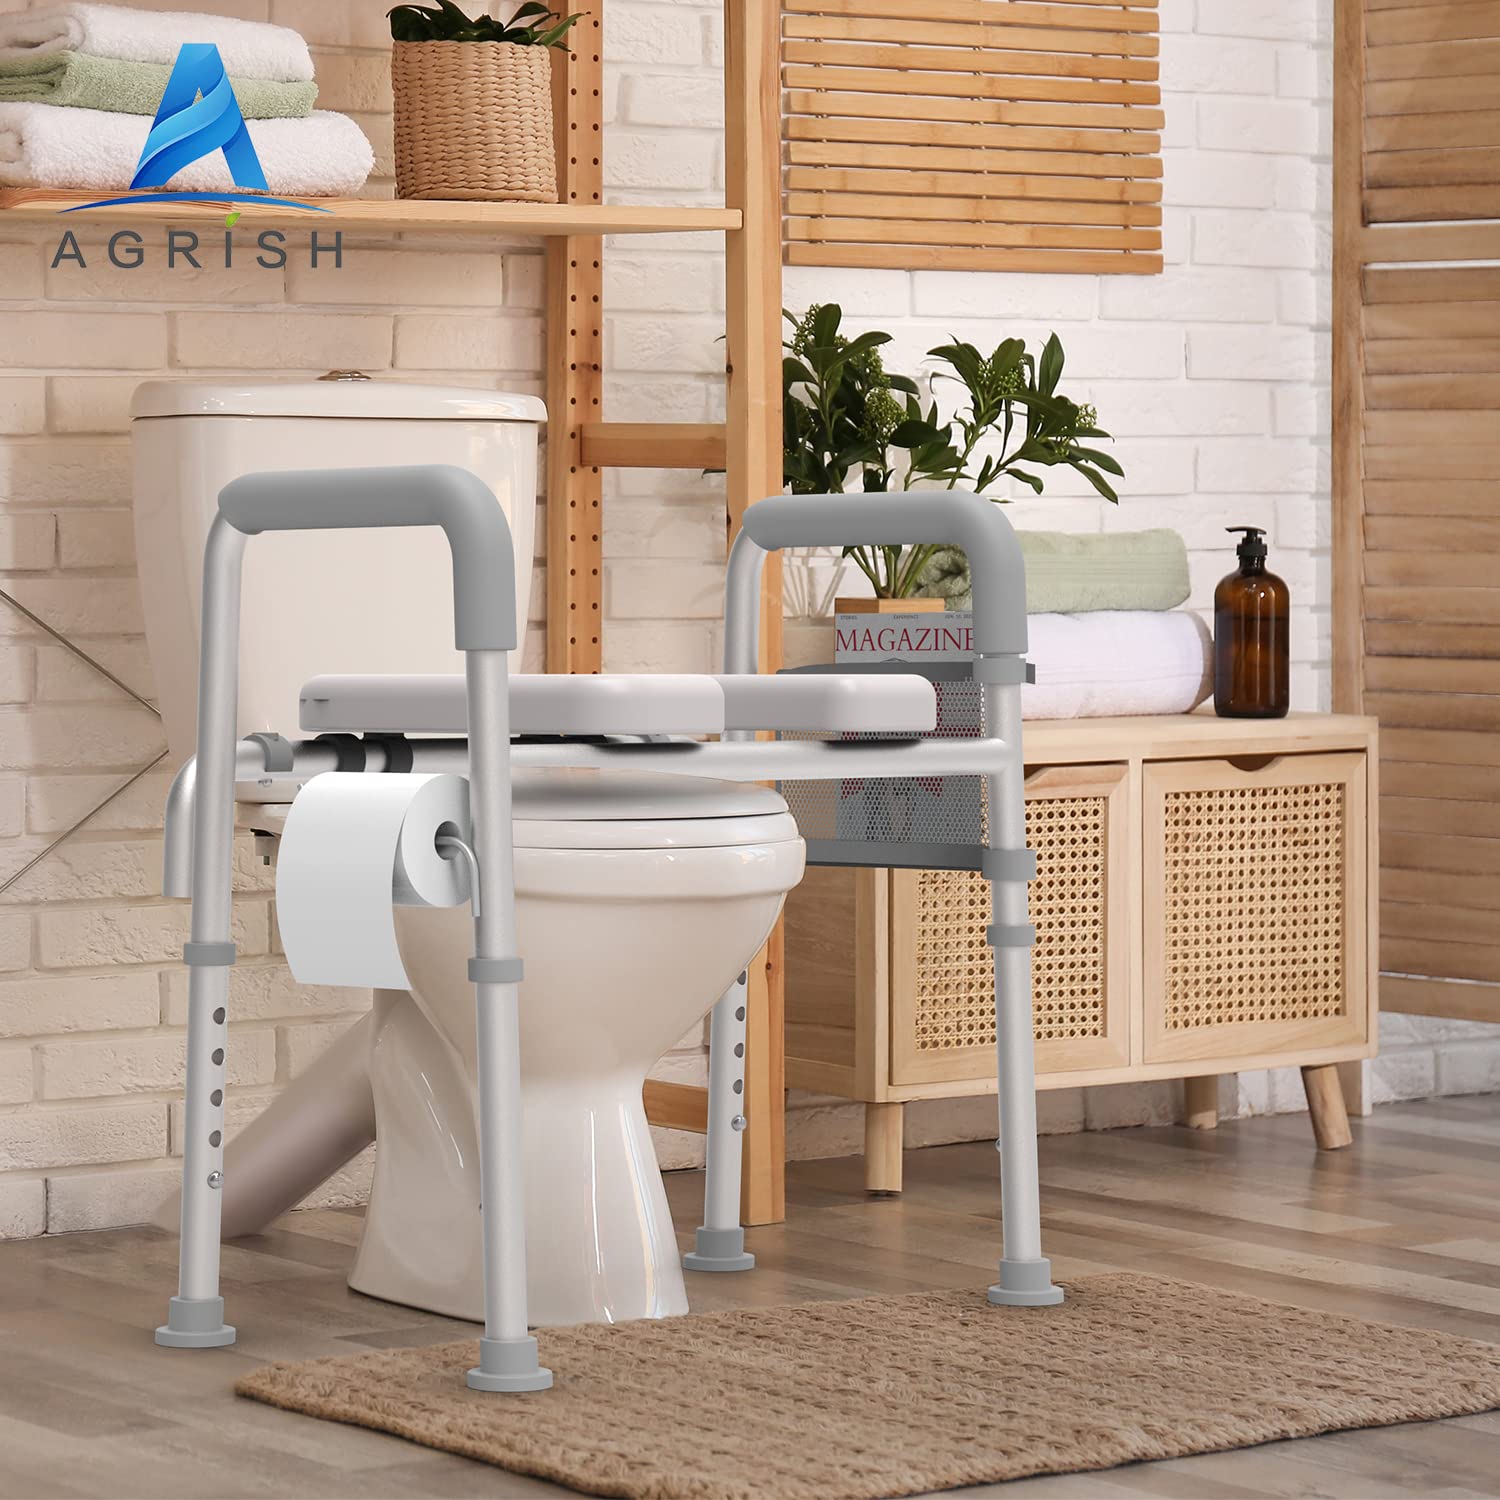 AGRISH Raised Toilet Seat with Handles - Cozy Padded Elevated Medical Commode w/Storage Bag & Paper Holder - 350lb Adjustable Safety Assist Shower Chair for Elderly, Handicap, Pregnant